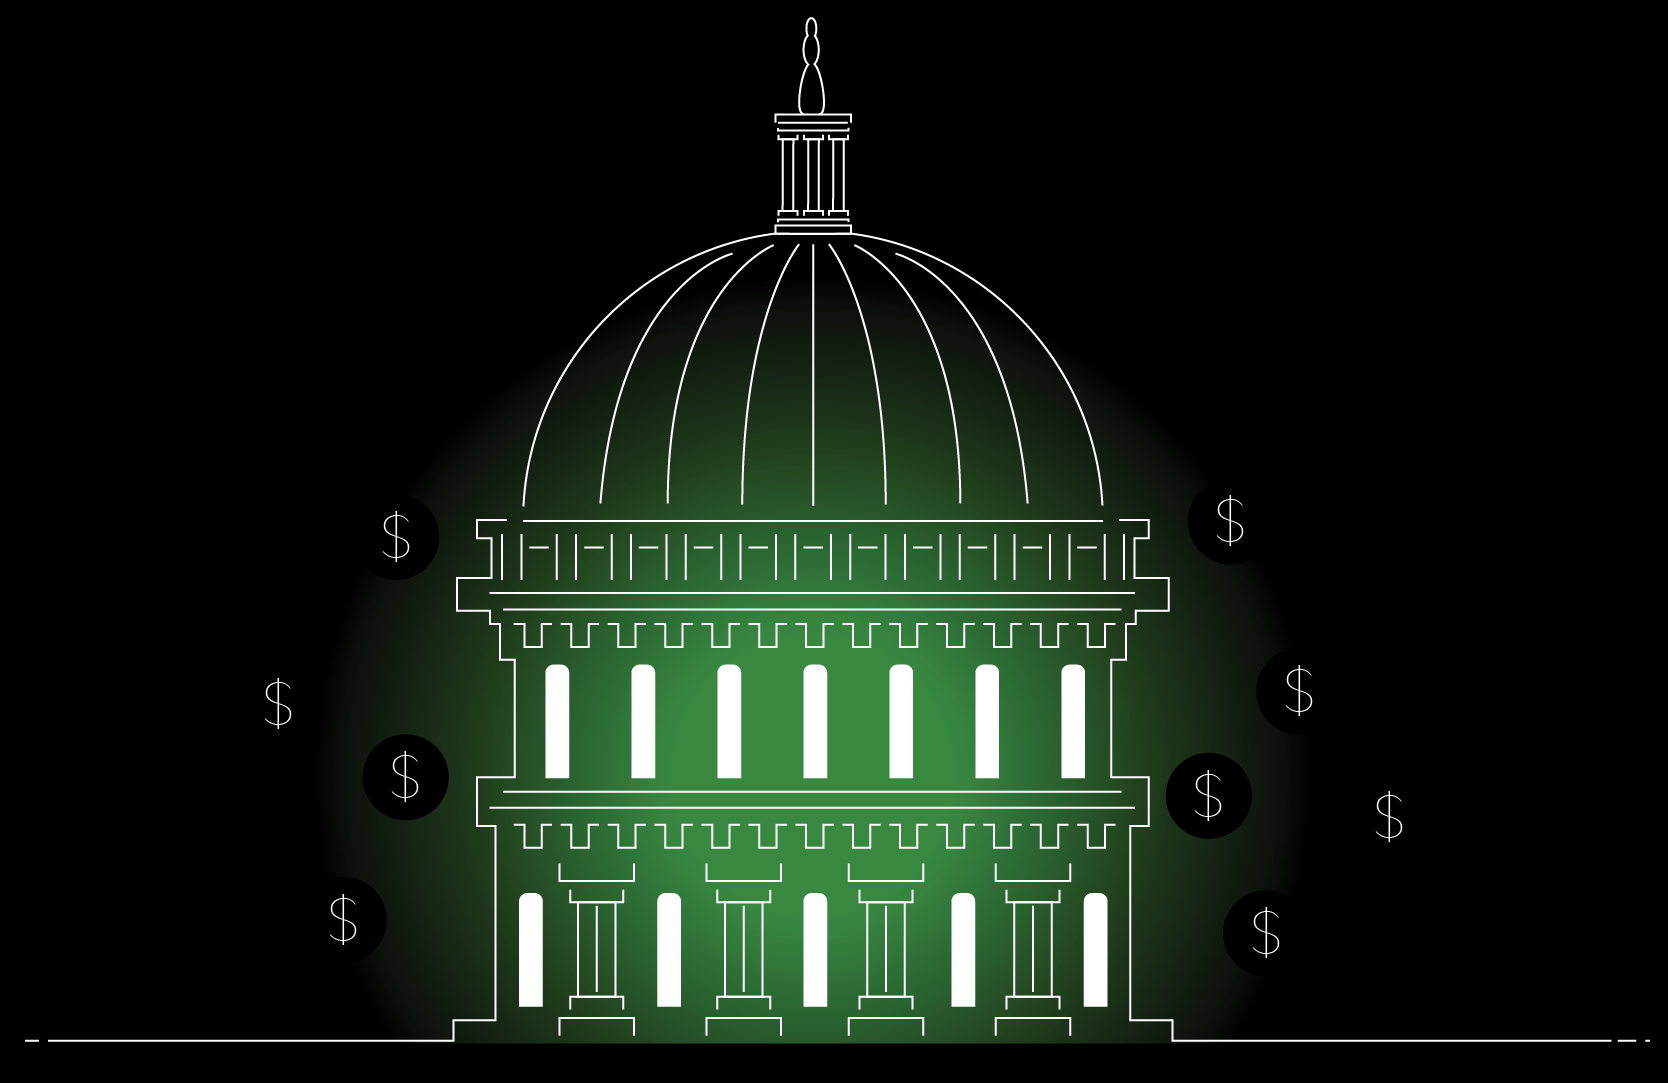 Government-looking structure with dollar signs